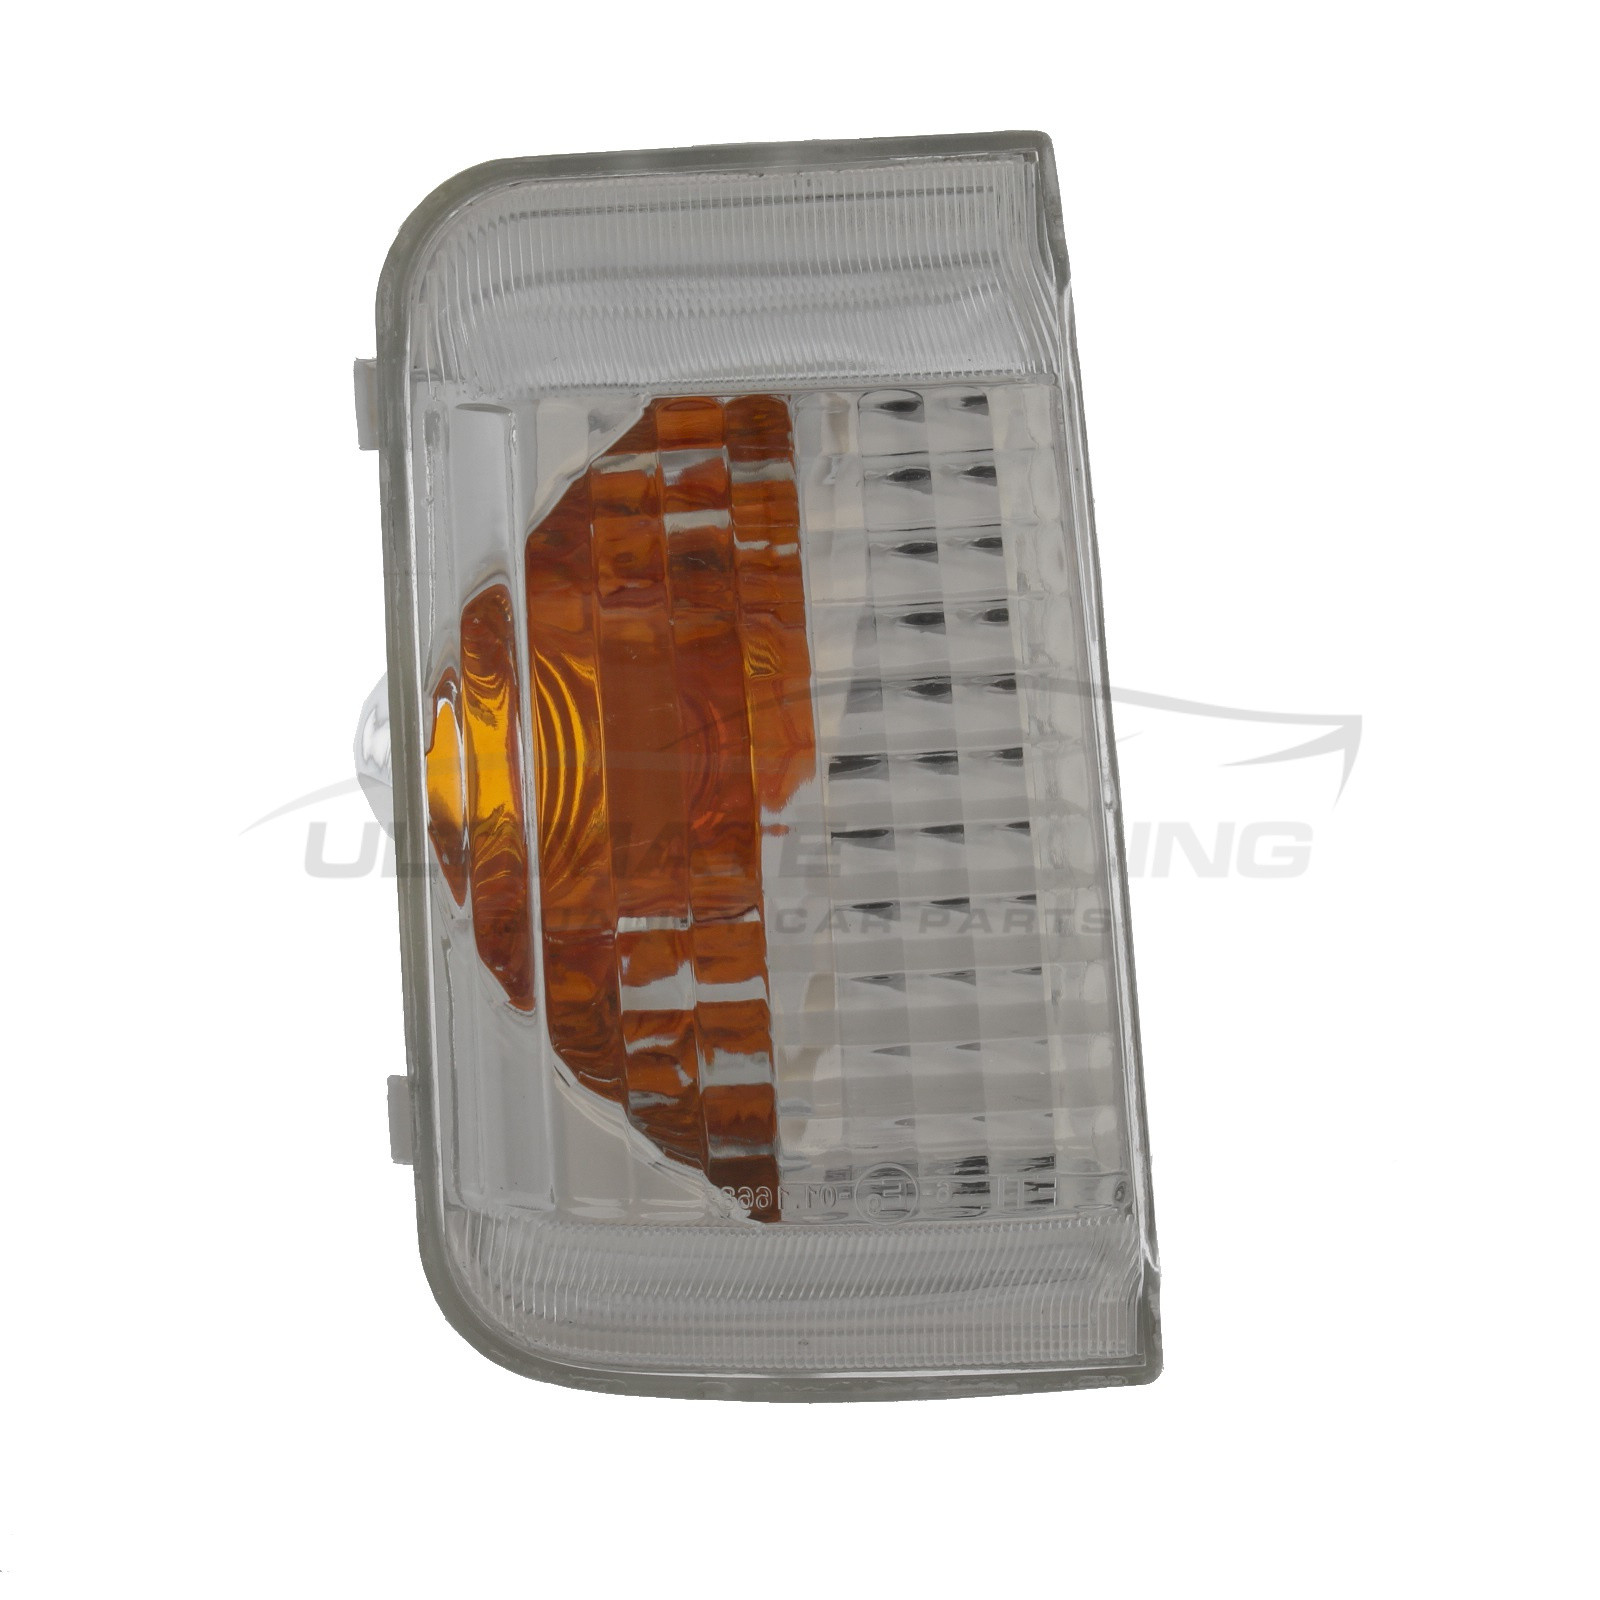 Citroen Relay 2006->, Fiat Ducato 2006->, Peugeot Boxer 2006->, Vauxhall Movano 2021-> Clear Non-LED To Suit Clear Bulb (Not Included) Mirror Indicator Includes Amber Reflector Passenger Side (LH)